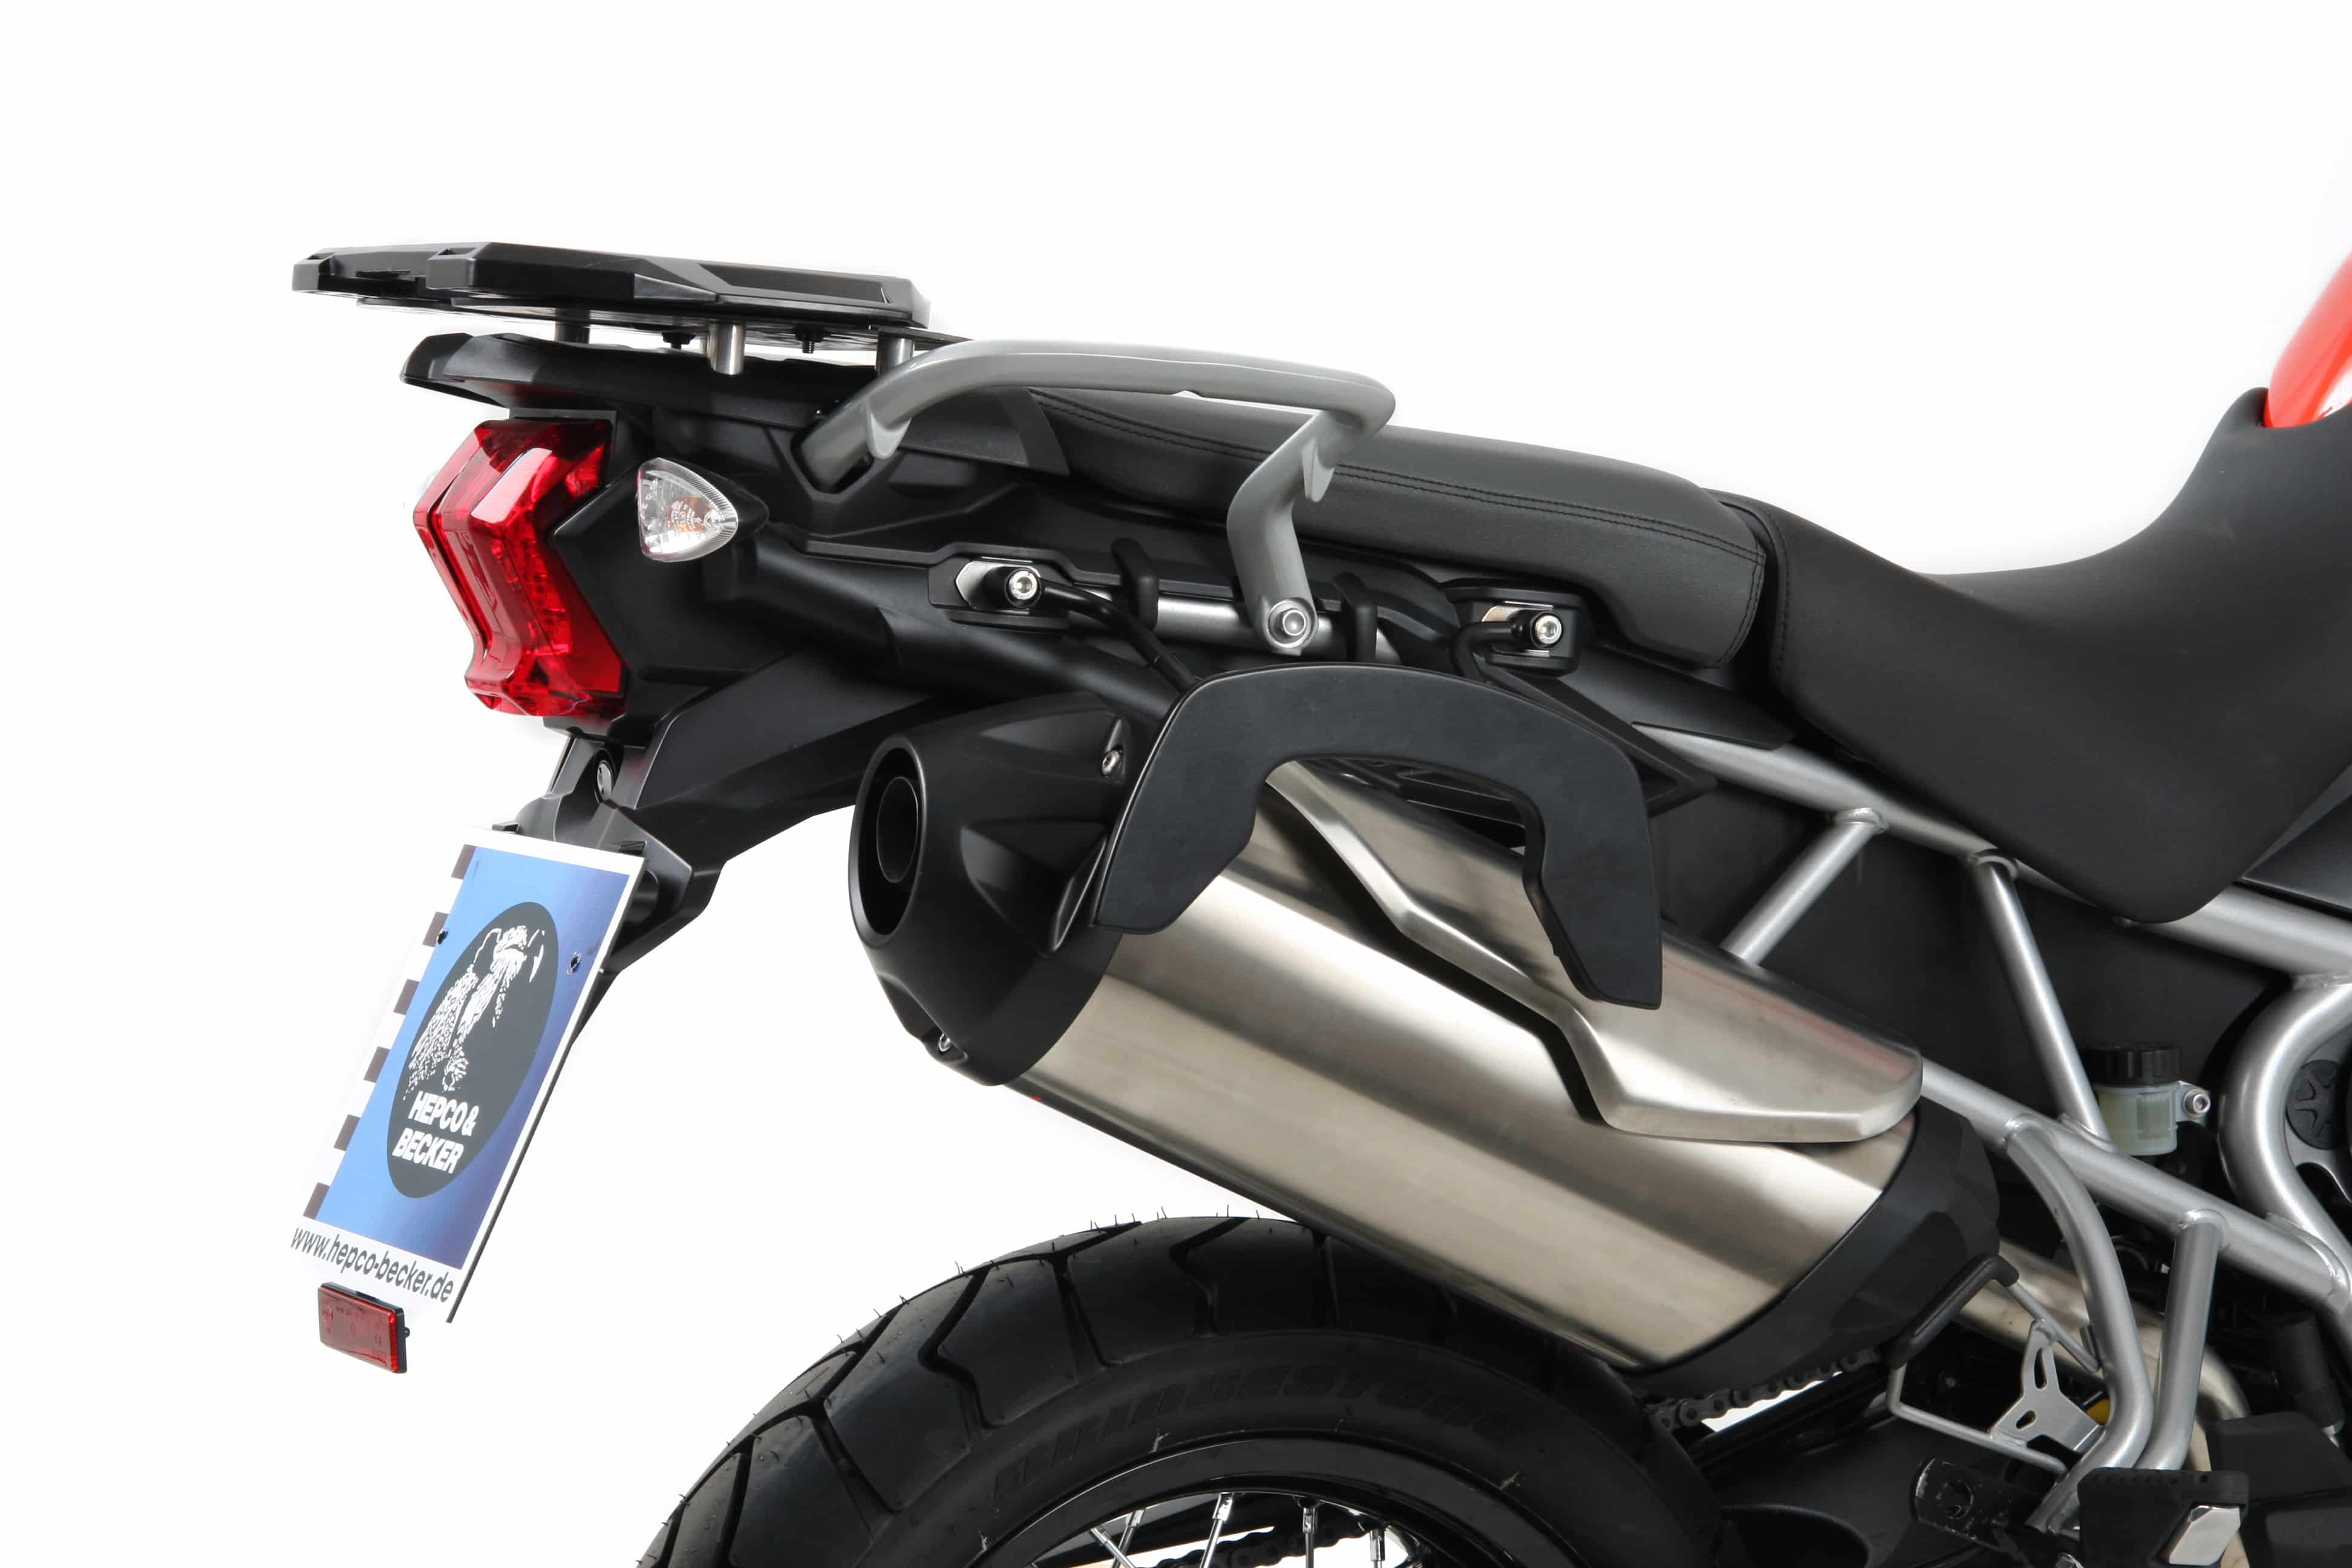 C-Bow sidecarrier for Triumph Tiger 800 XR / XRX / XRT (2015-2017)